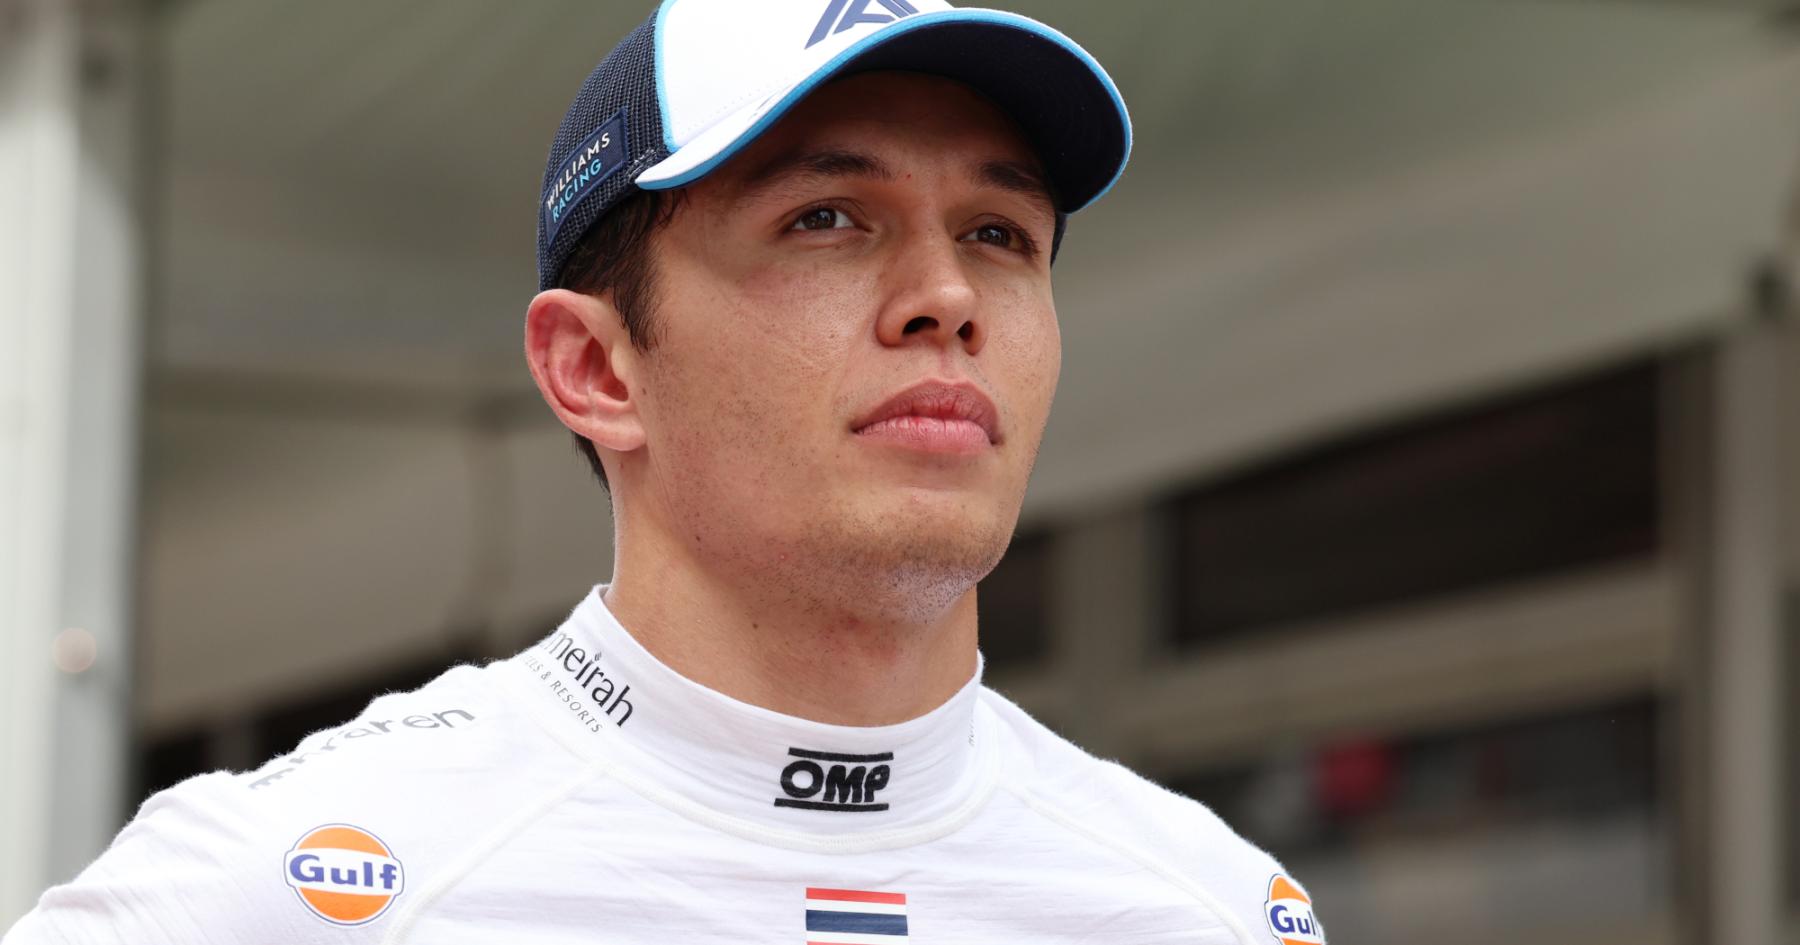 Albon Leaves Fans in Suspense as Williams F1 Future Remains Uncertain: Time Holds the Answer